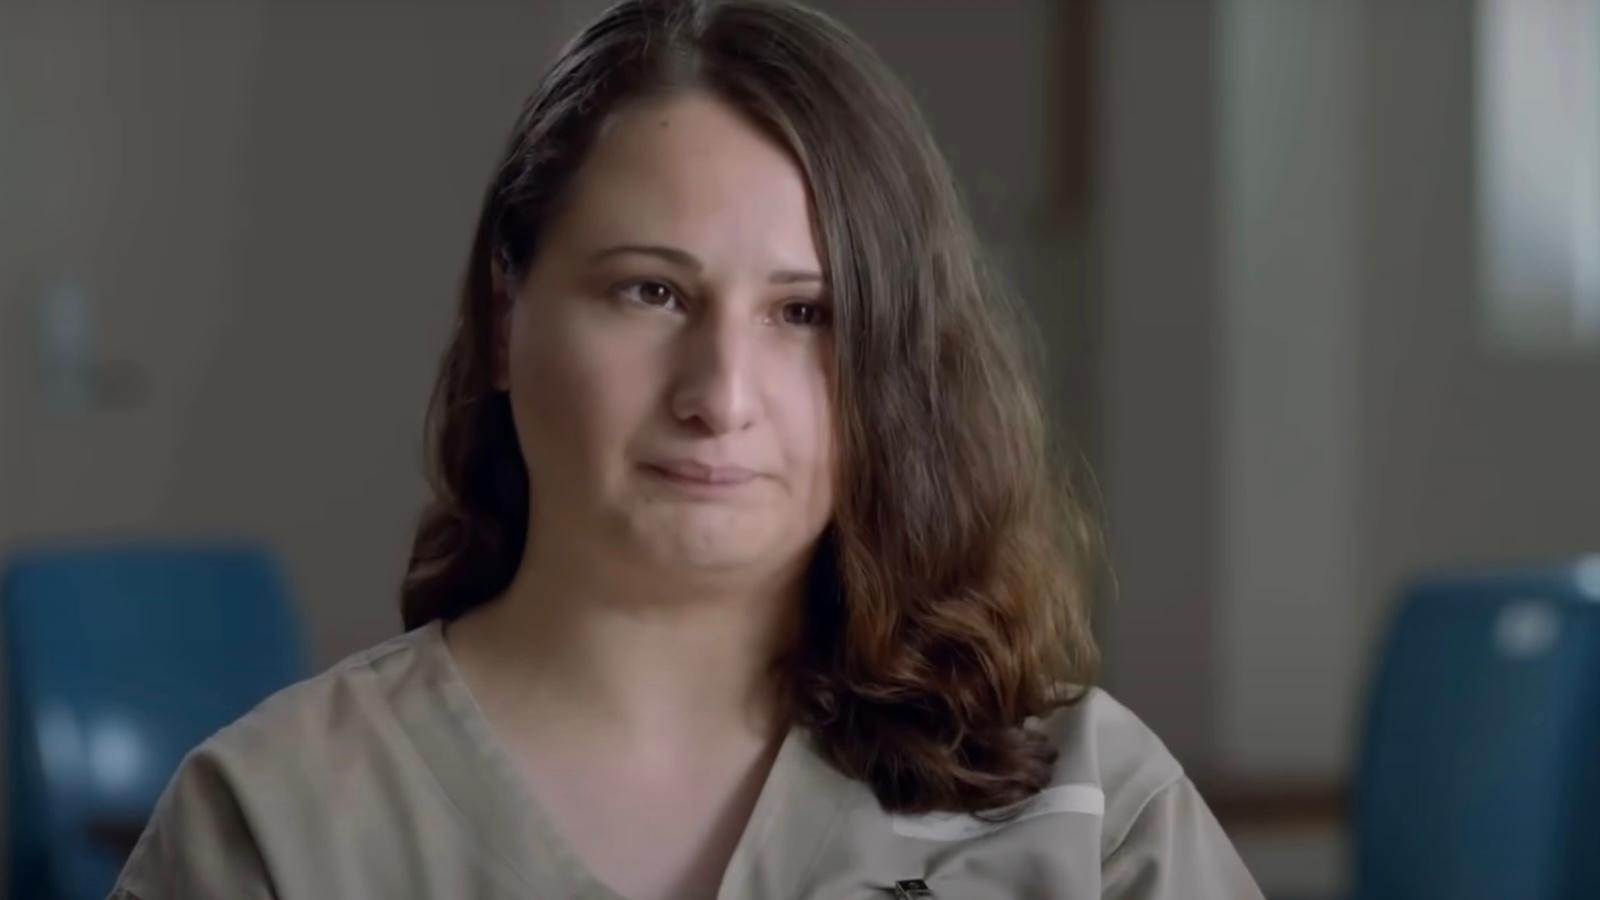 Gypsy Rose Blanchard speaks from prison in The Prison Confessions of Gypsy Rose Blanchard